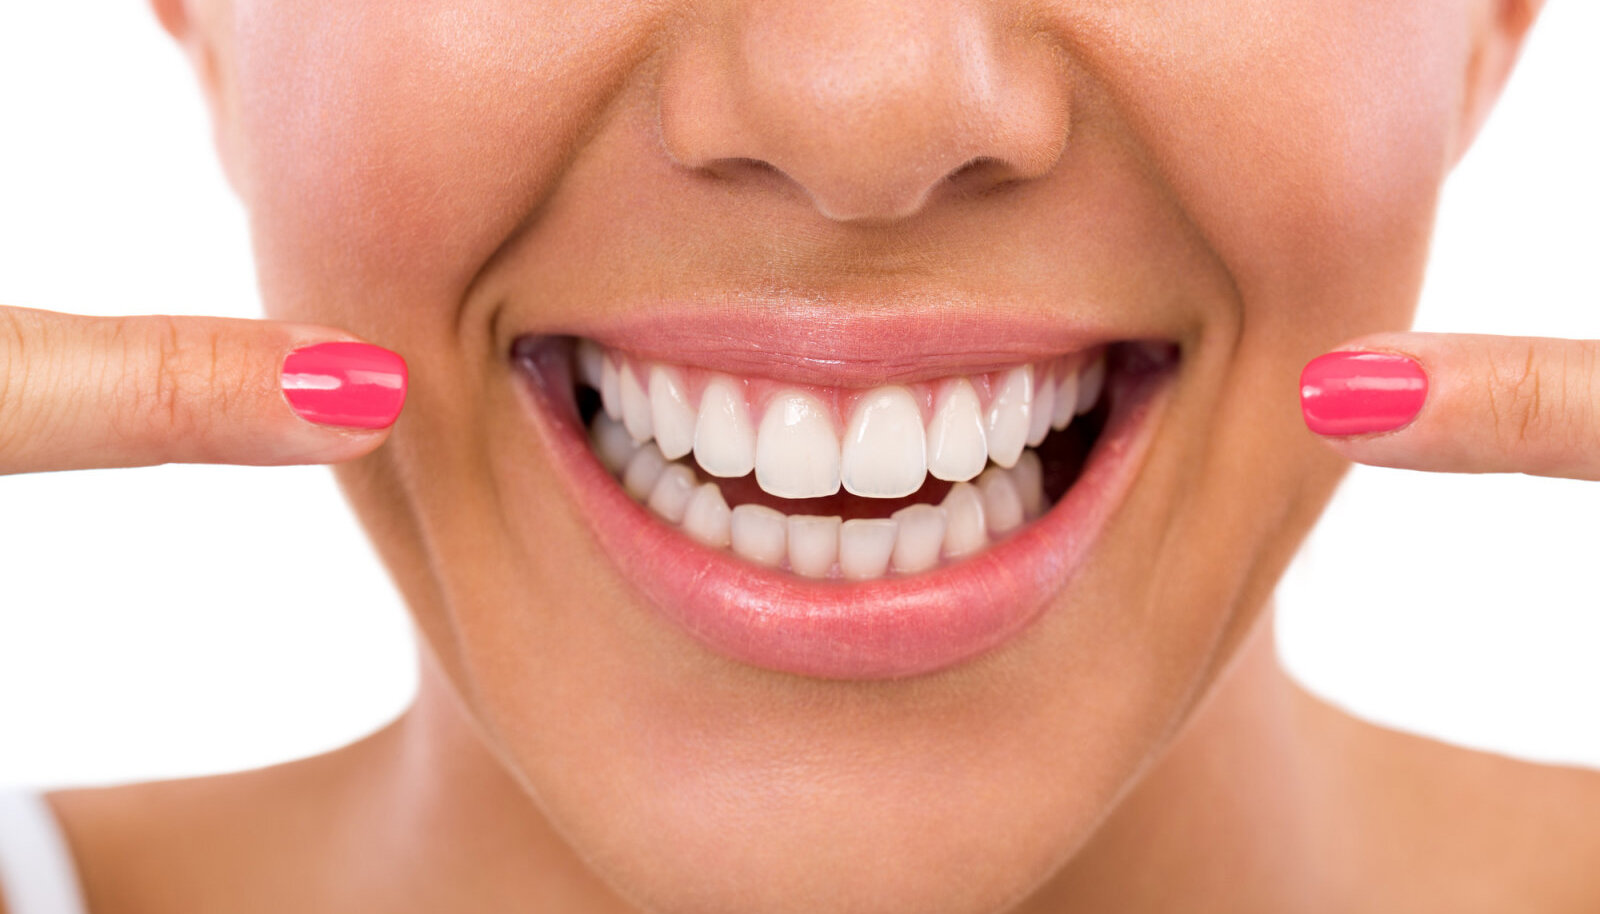 Are You Looking After Your Teeth the Right Way?